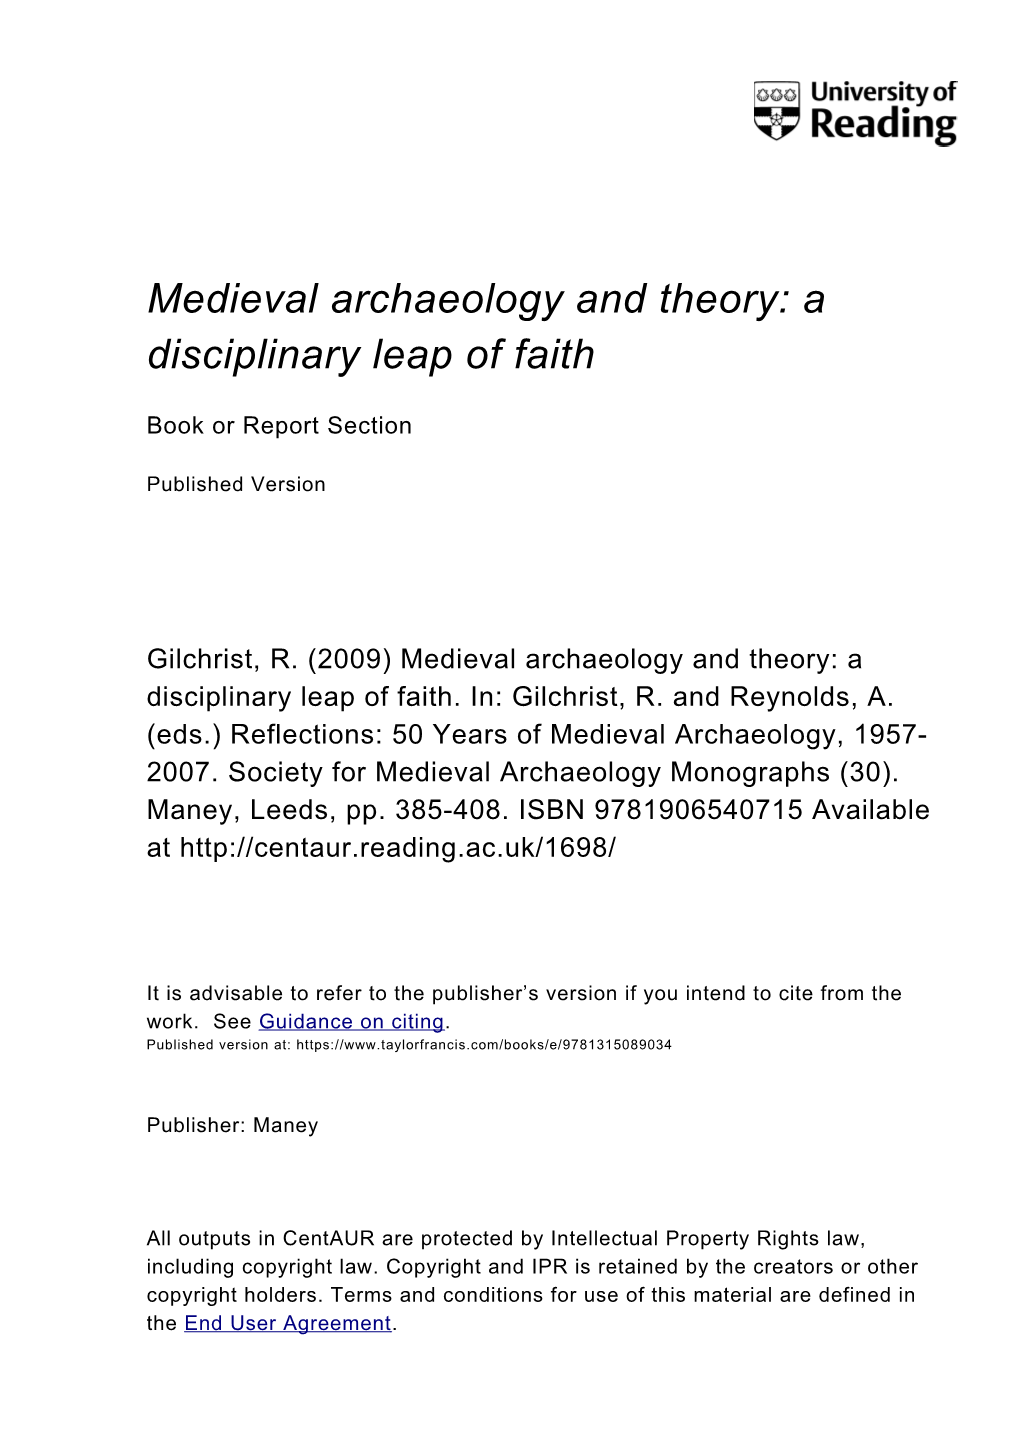 Medieval Archaeology and Theory: a Disciplinary Leap of Faith